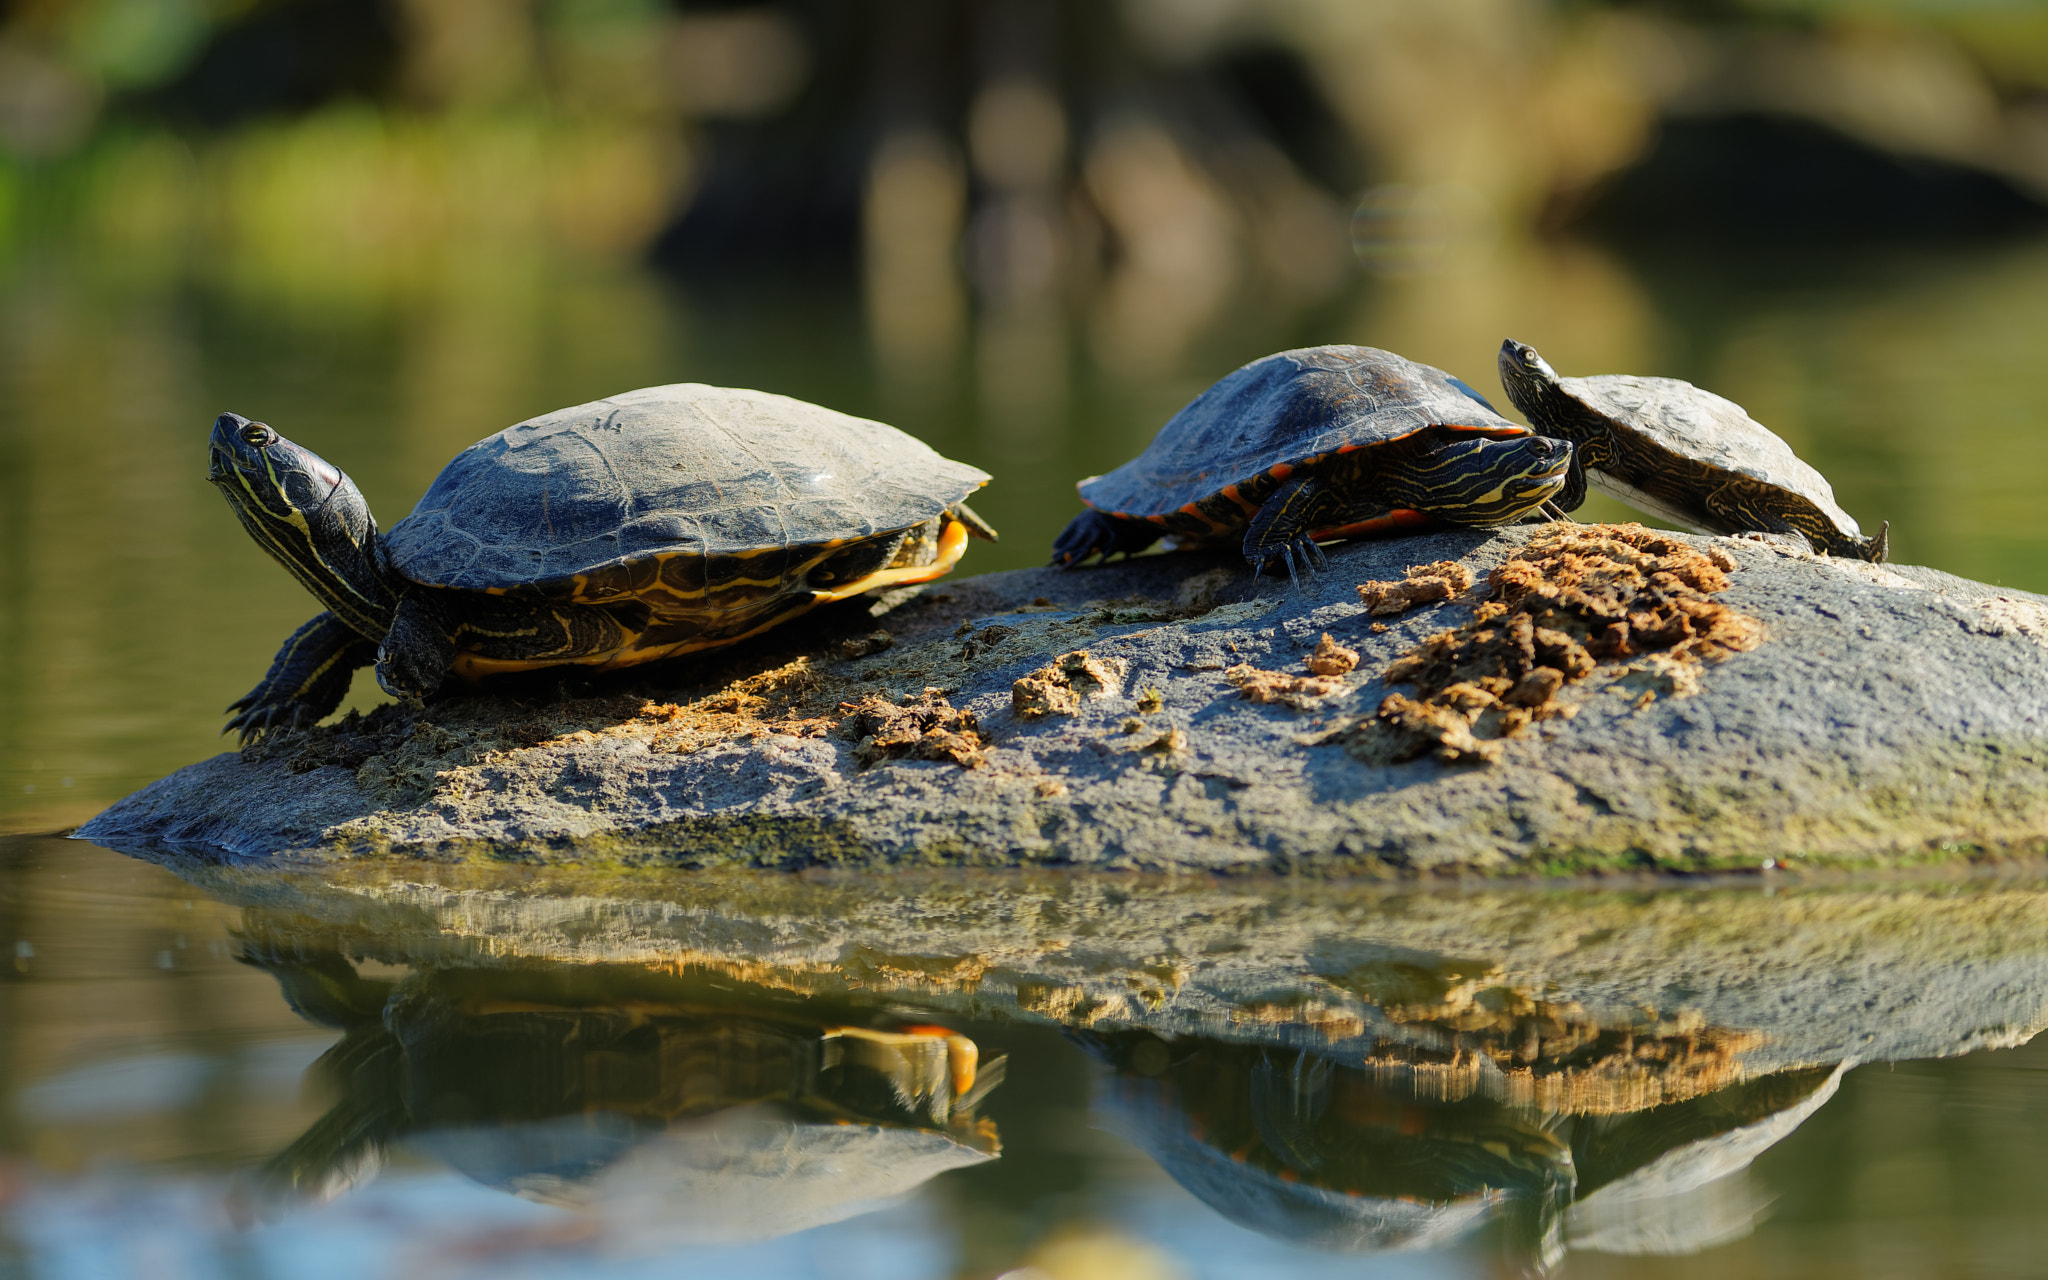 Sony a7 II sample photo. Turtle family photography